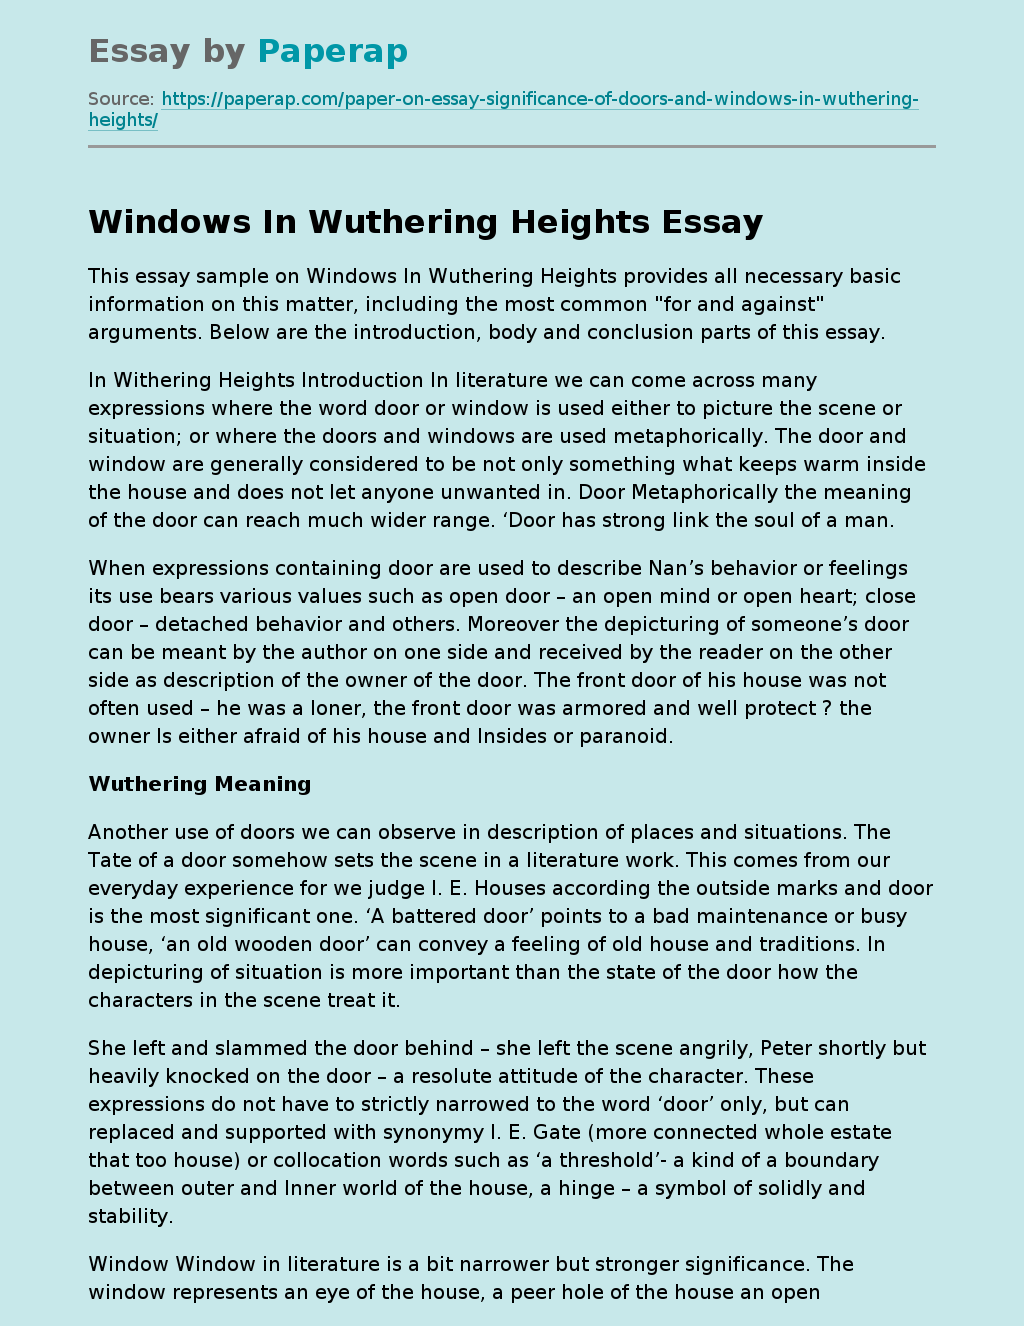 Windows In Wuthering Heights